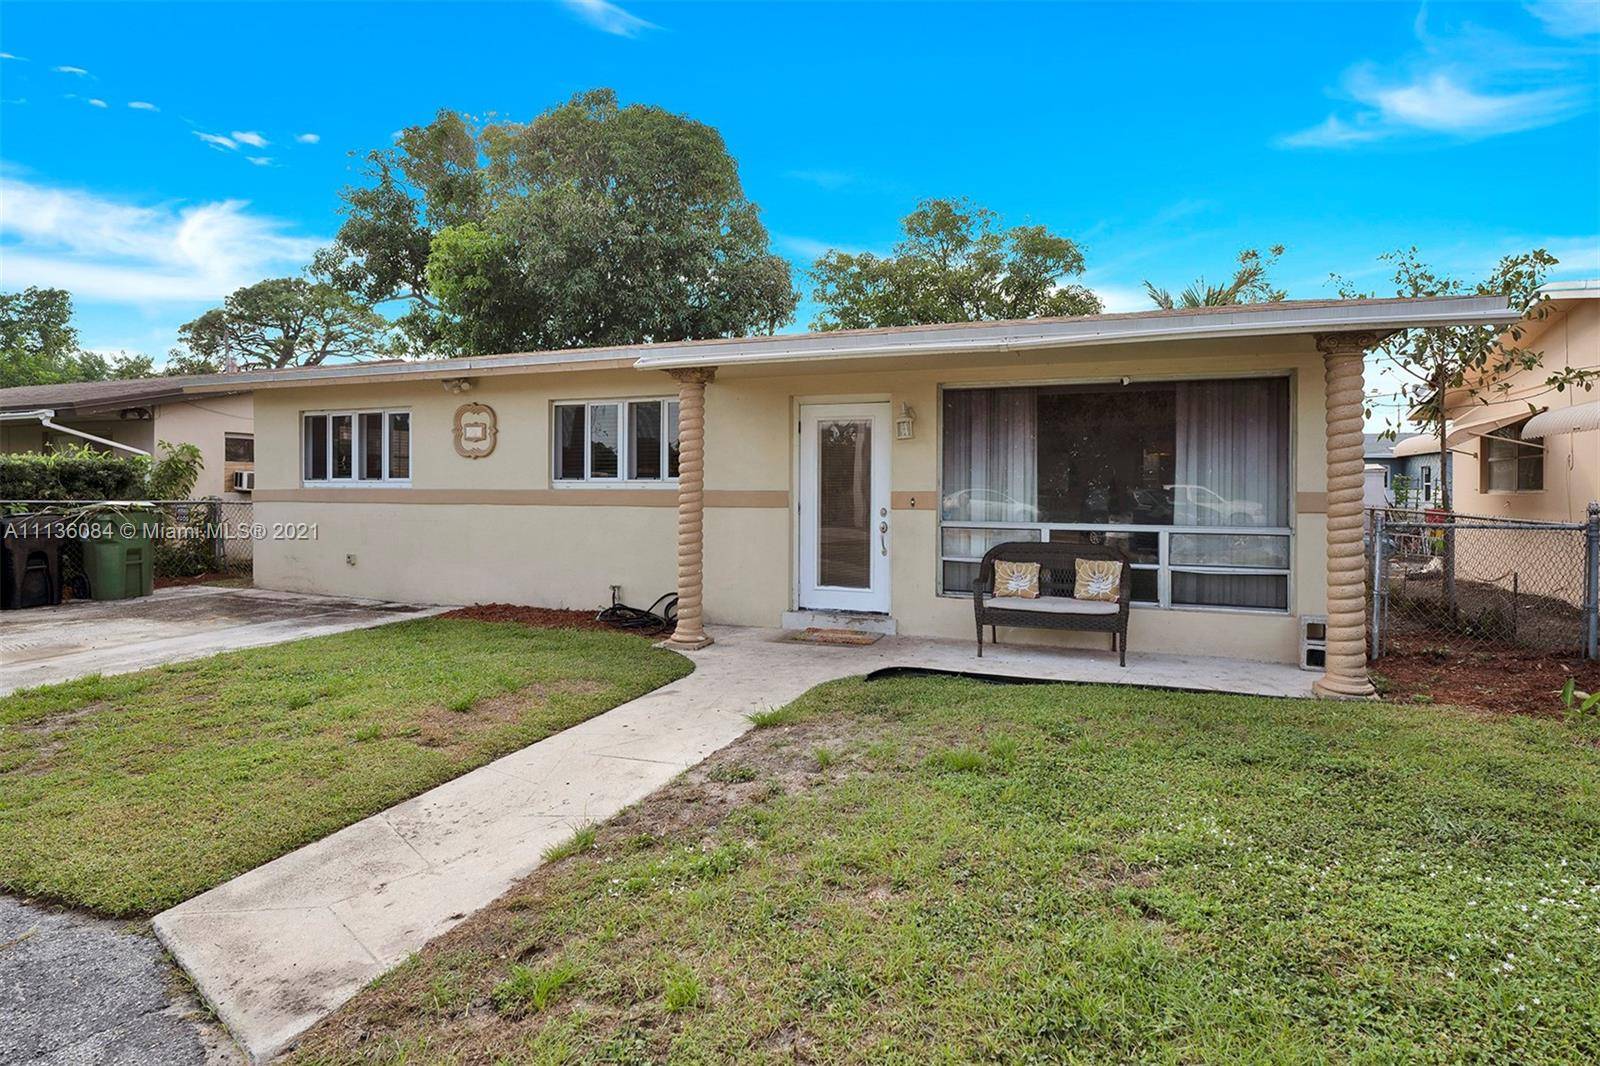 Great starter 3 bedroom, 2 bathroom home in the city of Fort Lauderdale.